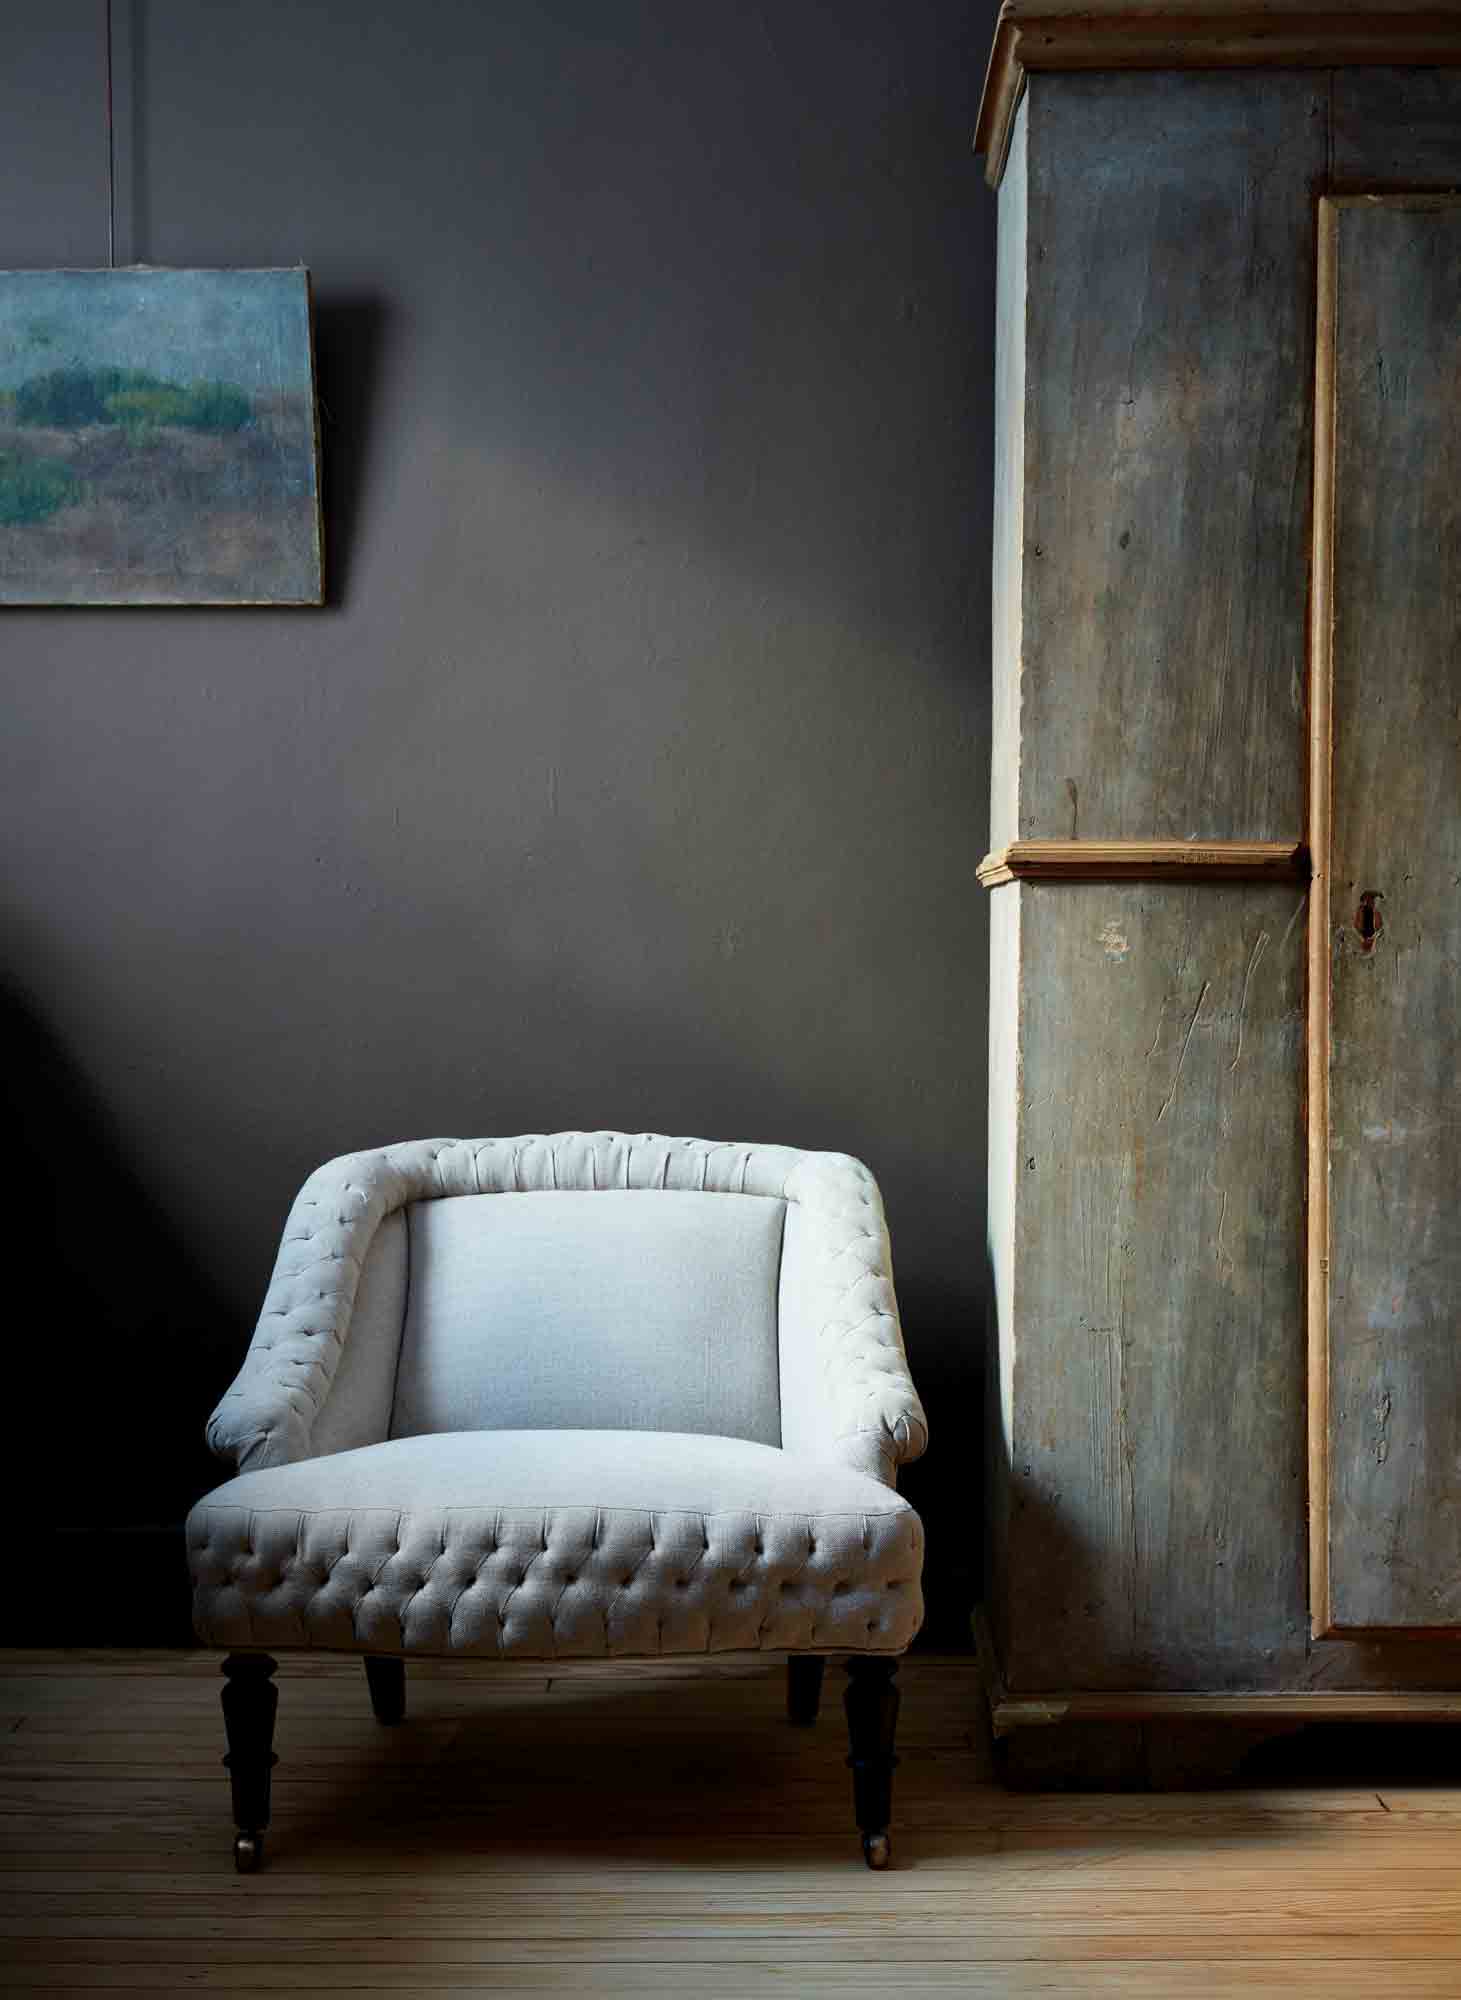  Royal chair in Vintage Flax. In the background is a dark colored wall with a painting hanging. Photographed in Vintage Flax. 